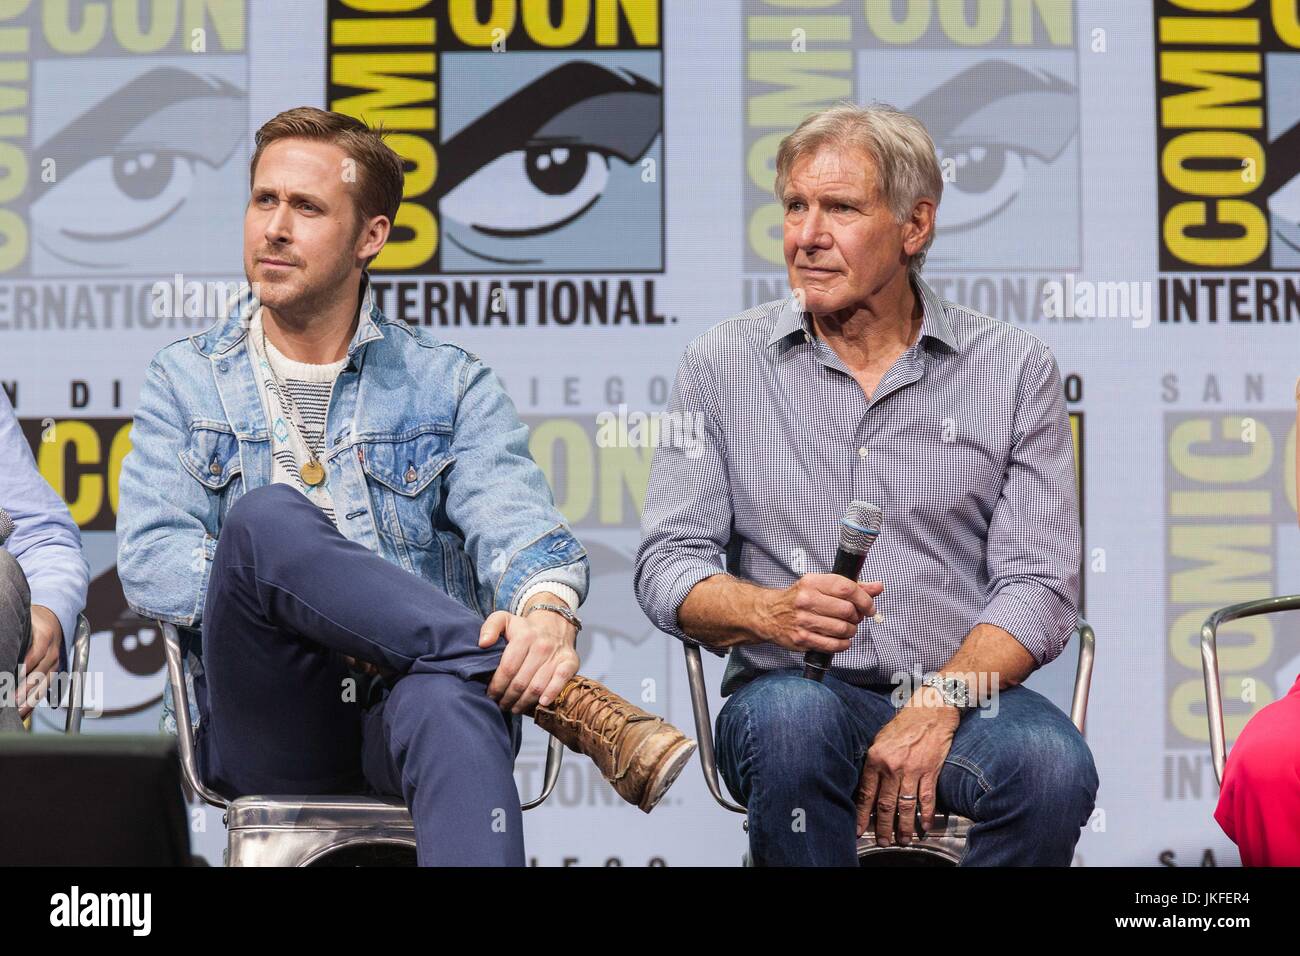 July 22, 2017 - San Diego, US - Day three in Hall H. .Blade Runner 2049, Alcon Entertainment's sequel to the cult classic, which takes us 30 more years into the future, with stars Ryan Gosling and Harrison Ford as well as Ana de Armas, Sylvia Hoeks, Robin Wright, Lennie James, and Mackenzie Davis, writers Hampton Fancher and Michael Green, and the film's director, Denis Villeneuve.Seen here: Ryan Gosling and Harrison Ford (Credit Image: © Daren Fentiman via ZUMA Wire) Stock Photo